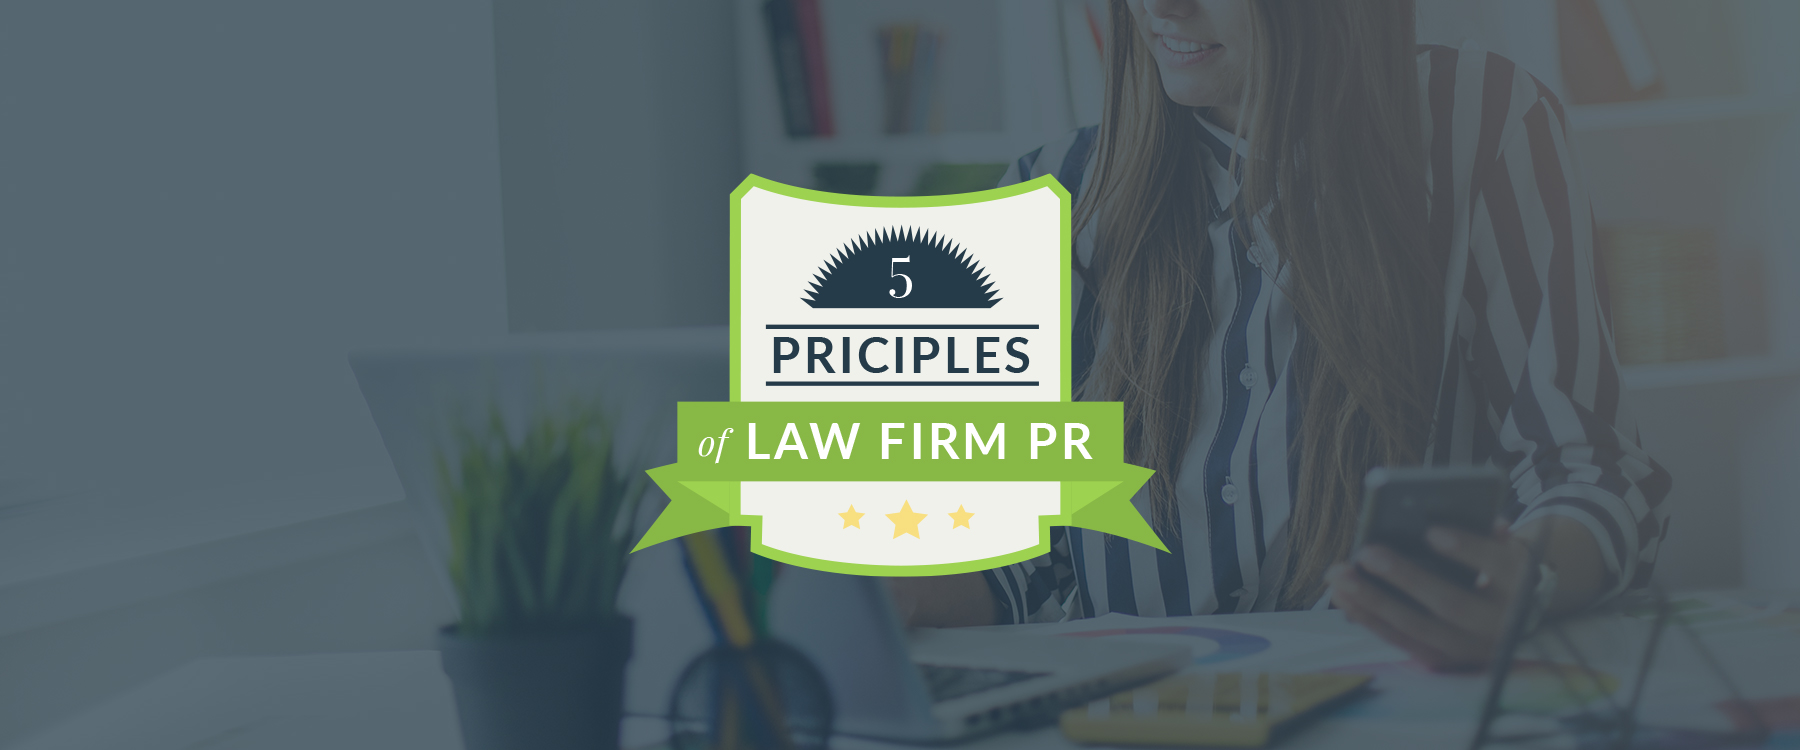 5 principles of law firm PR cover photo